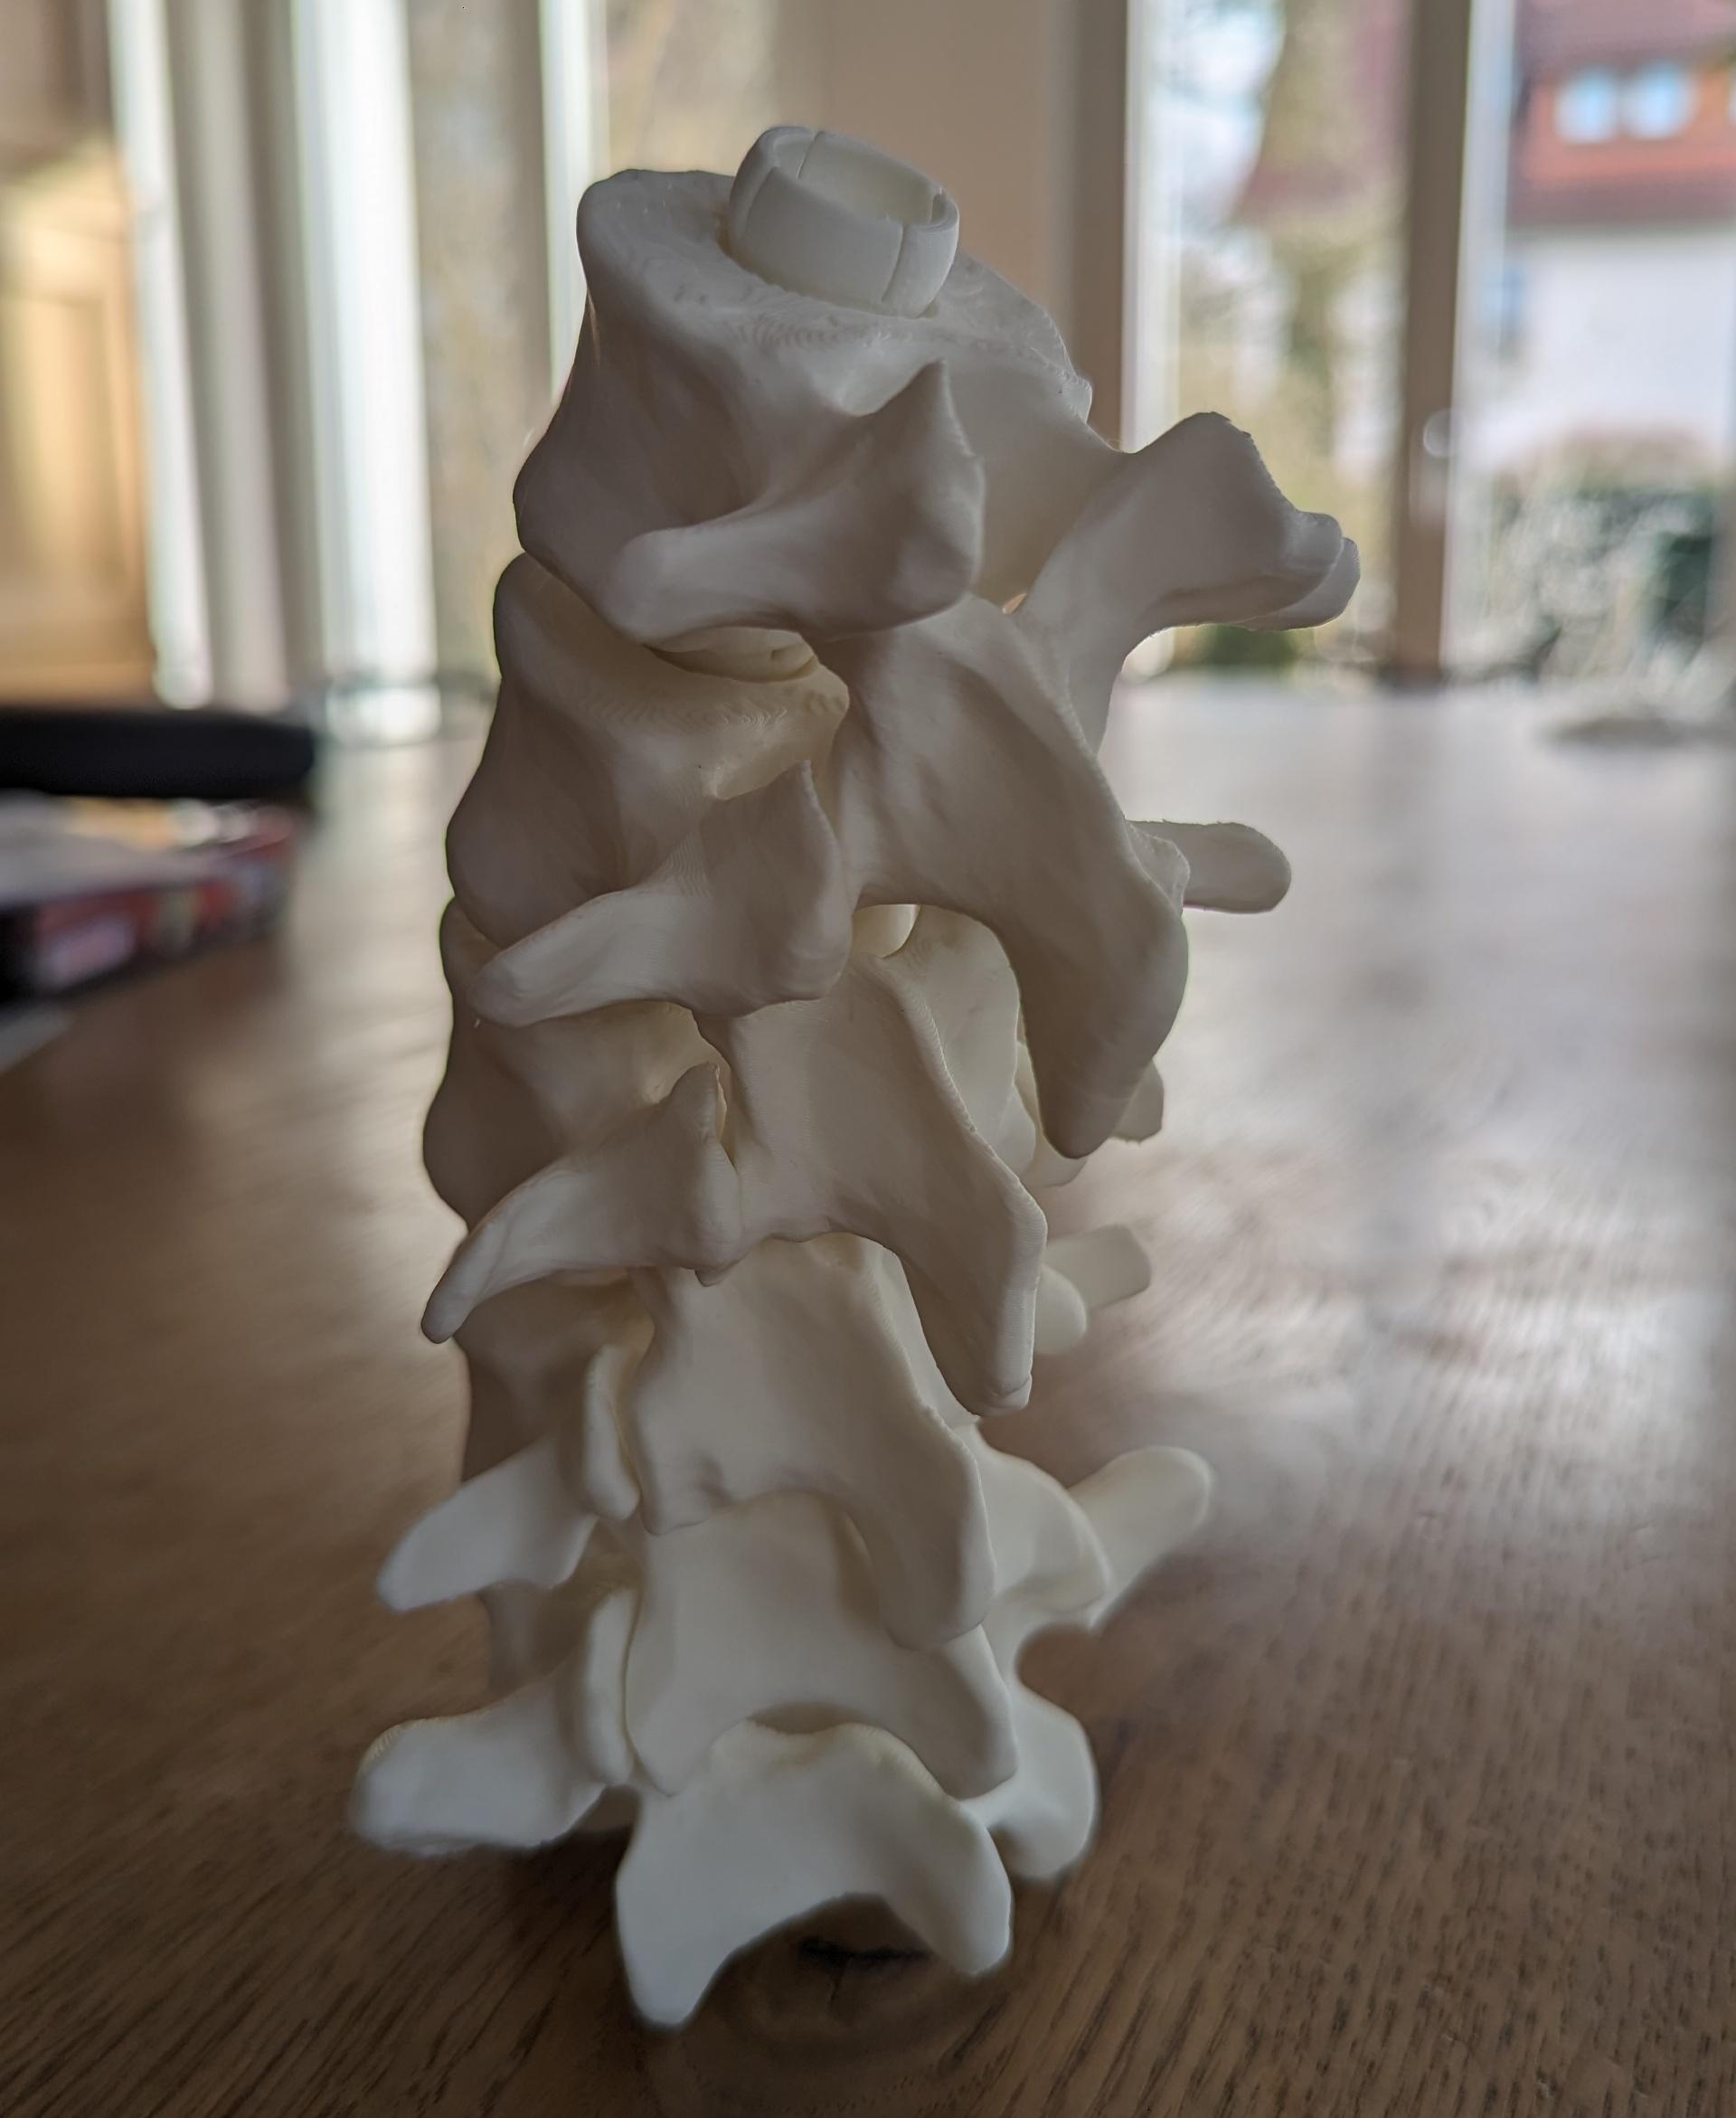 Full-sized Anatomically Correct Articulating Spine - Great model. Fits perfect :)

Prusa MINI+

17,5h  - 3d model